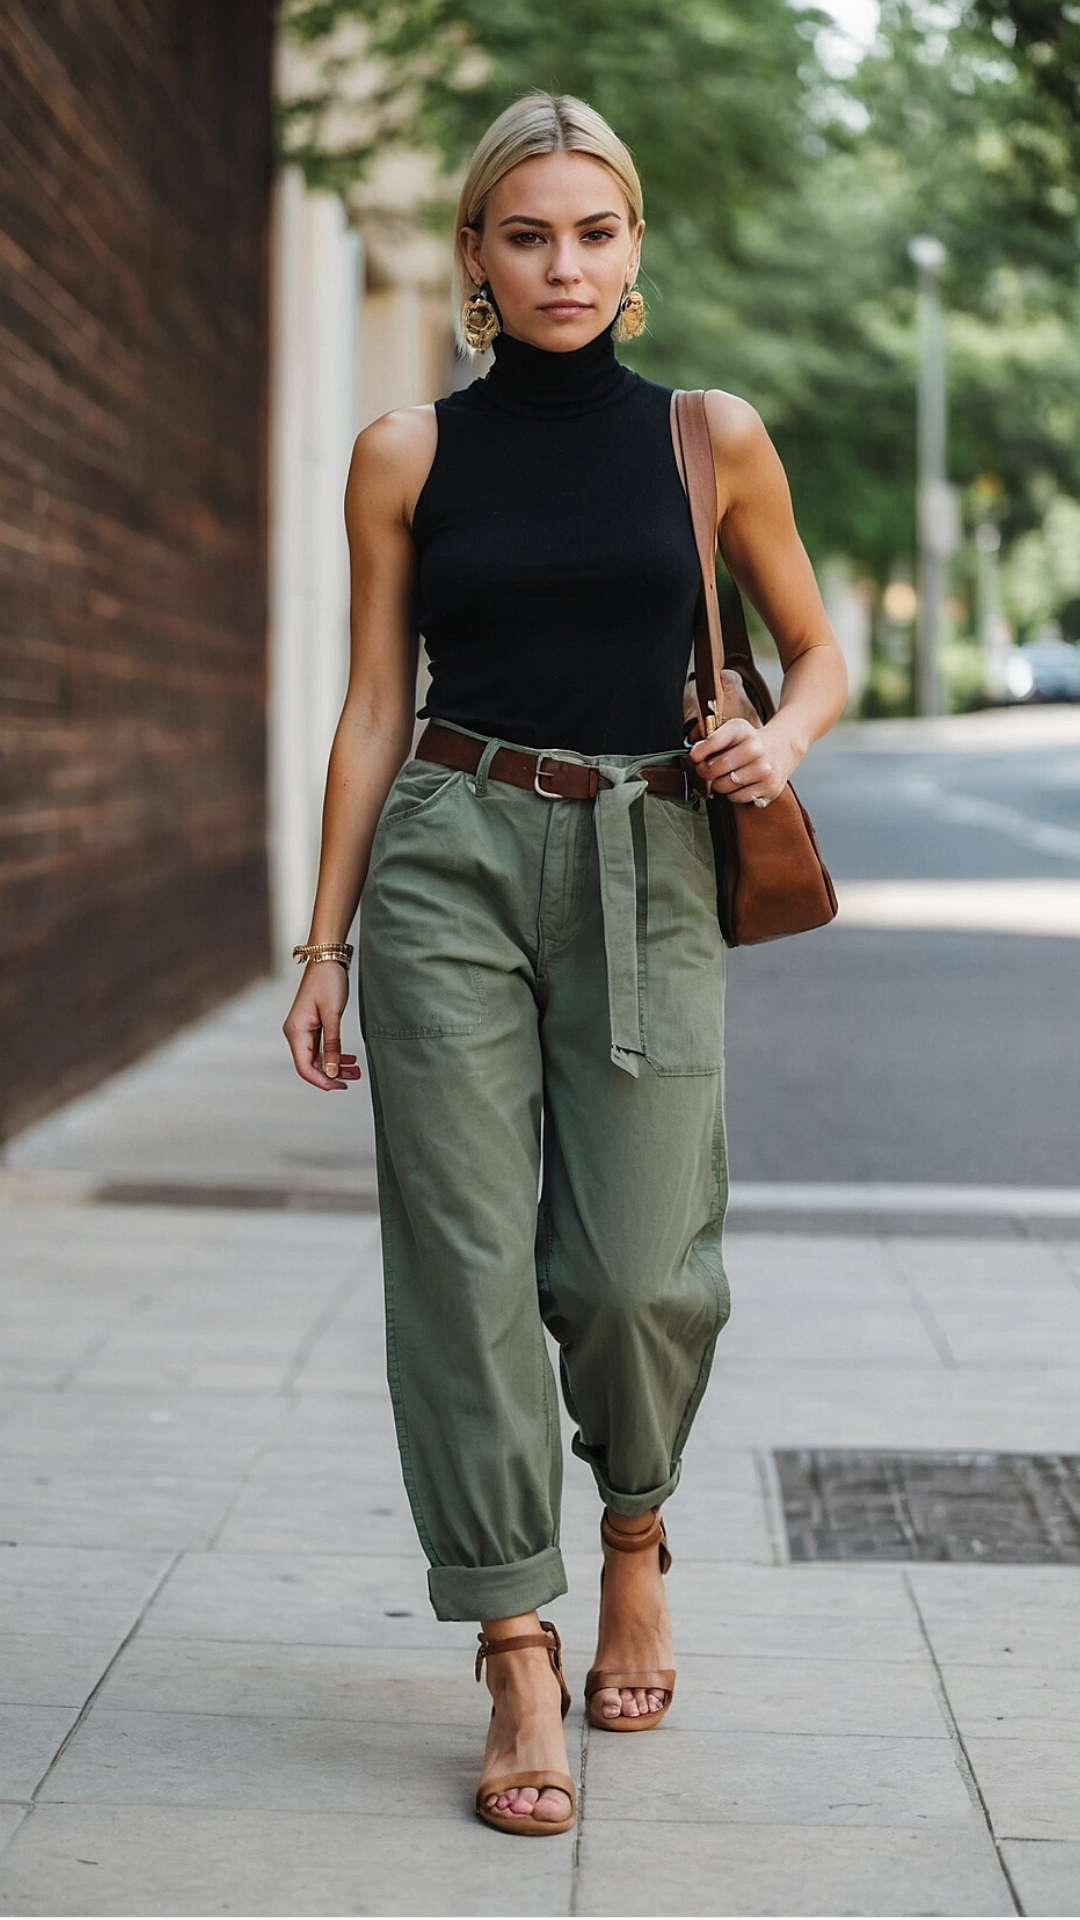 Sophisticated Comfort: Women's Relaxed Street Style